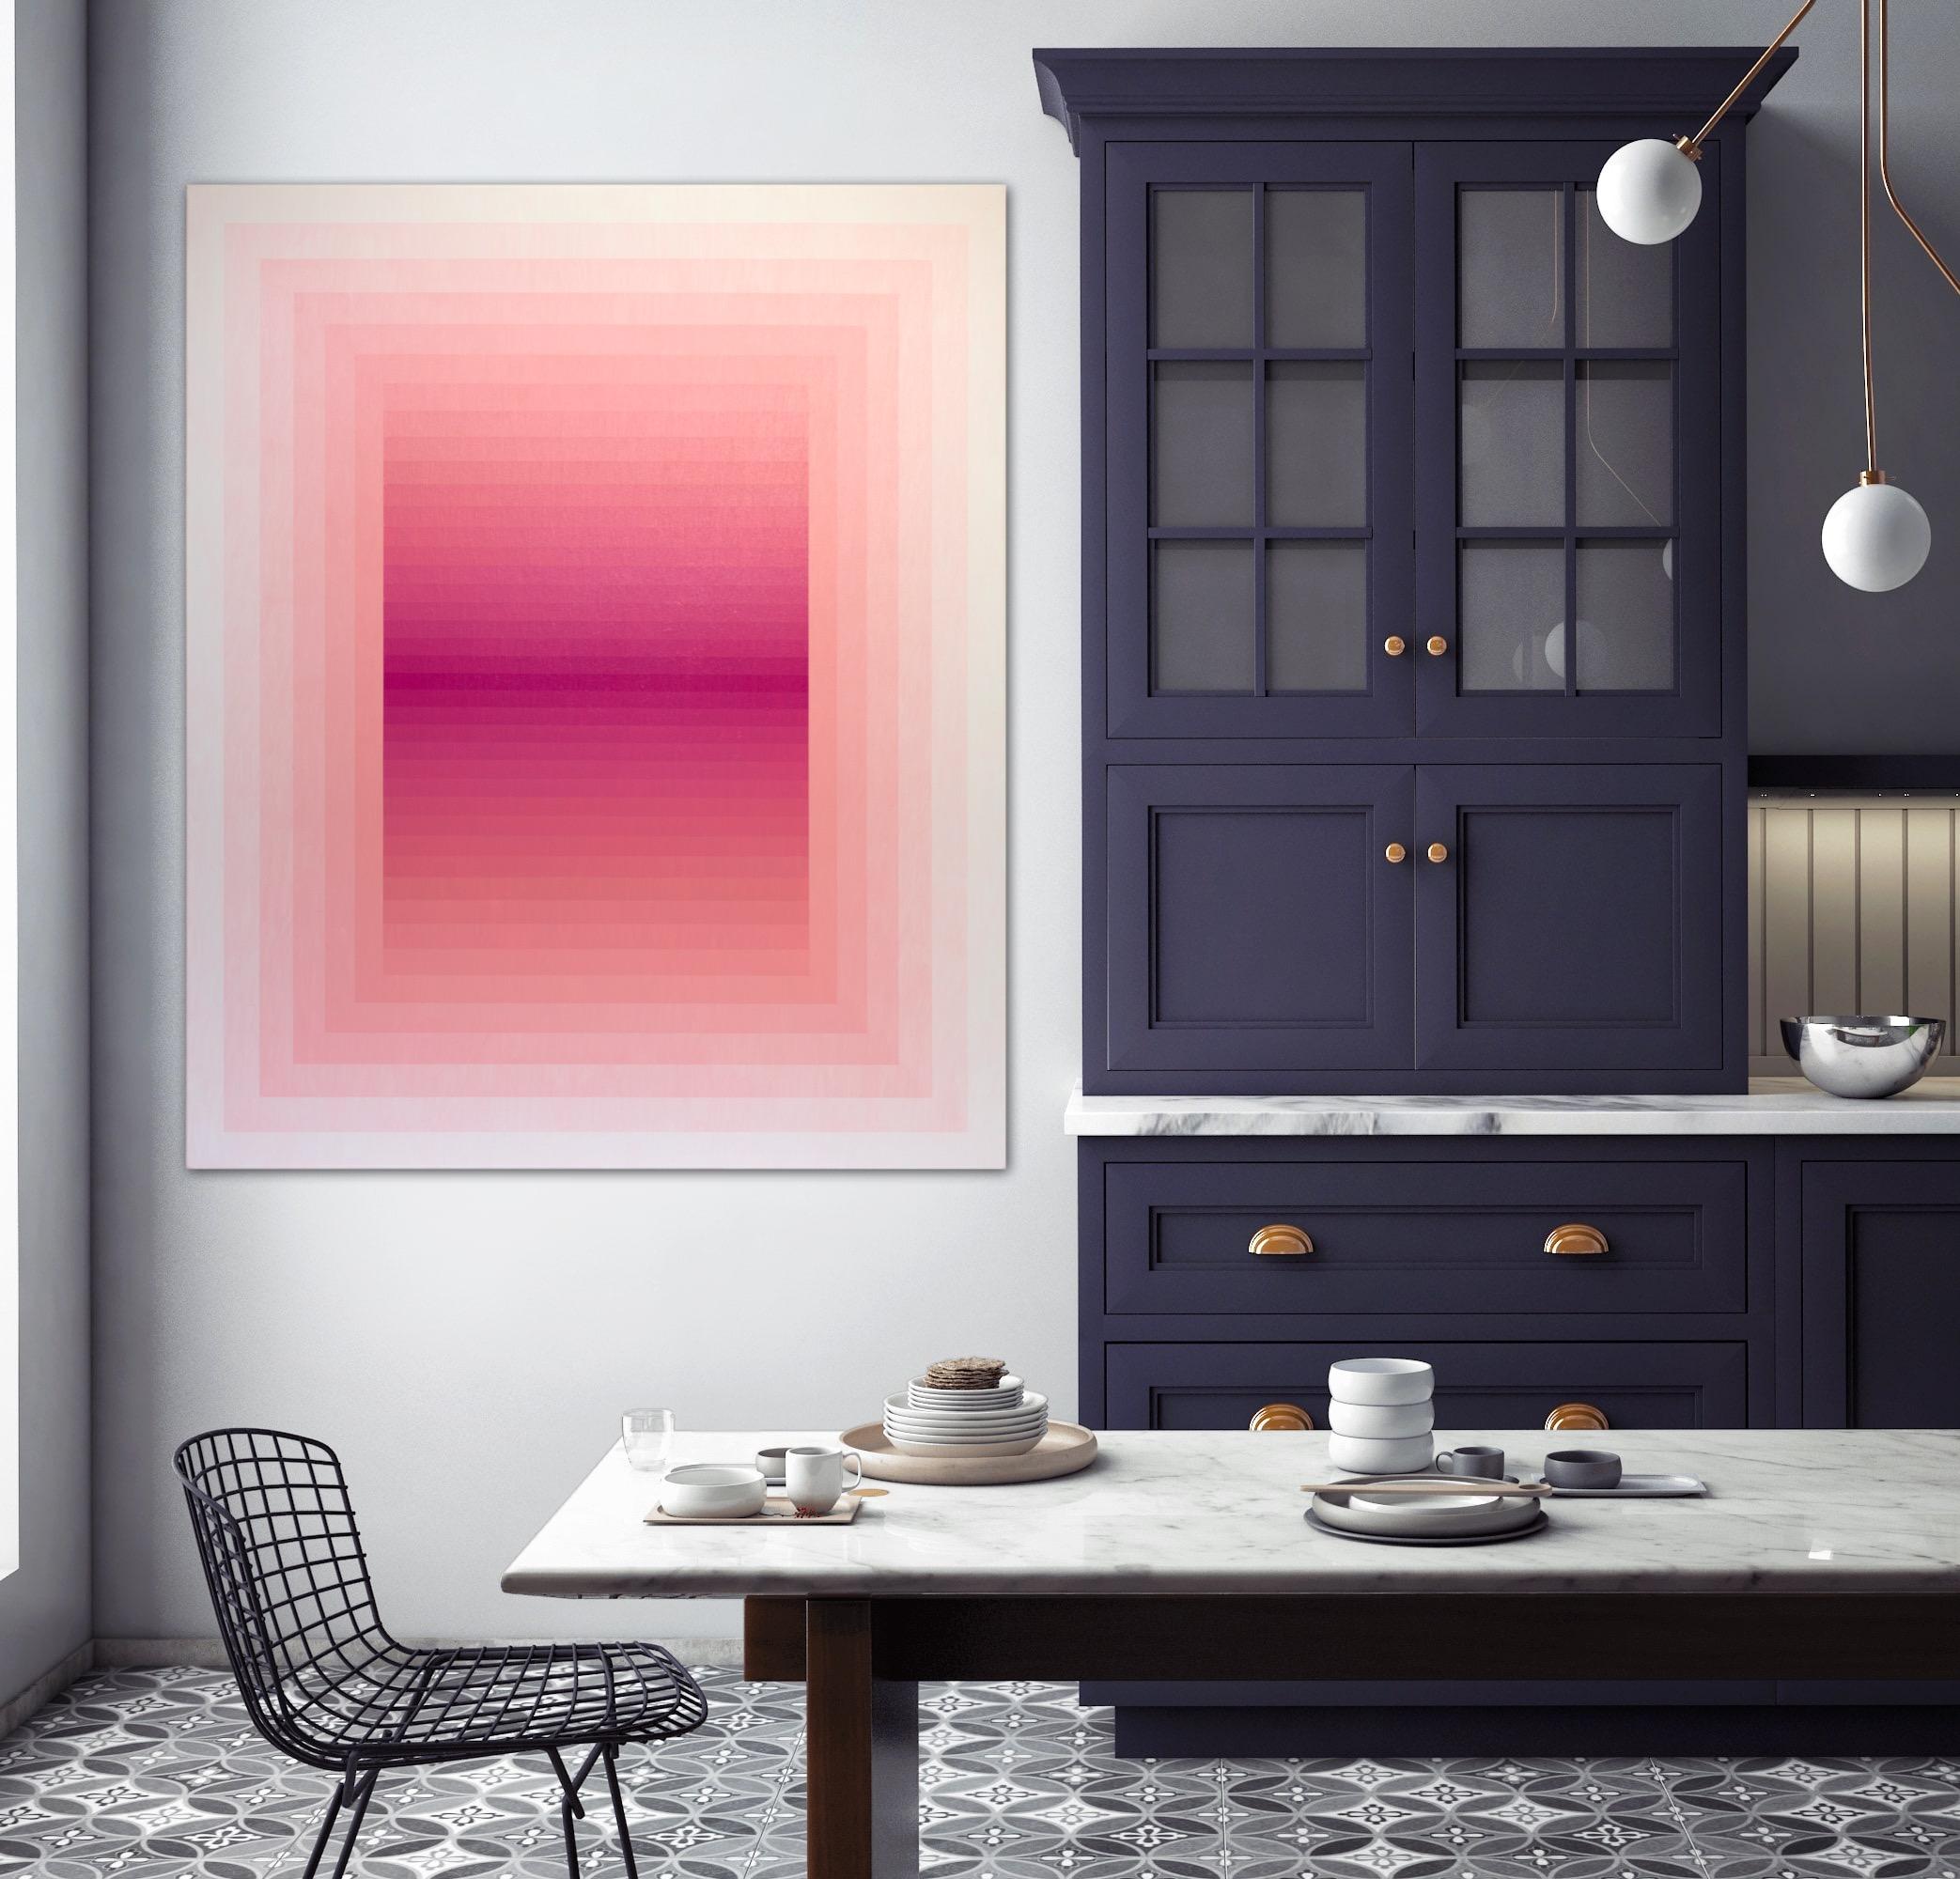 Adjusted Light (Magenta) - Abstract Geometric Mixed Media Art by Andy Harwood